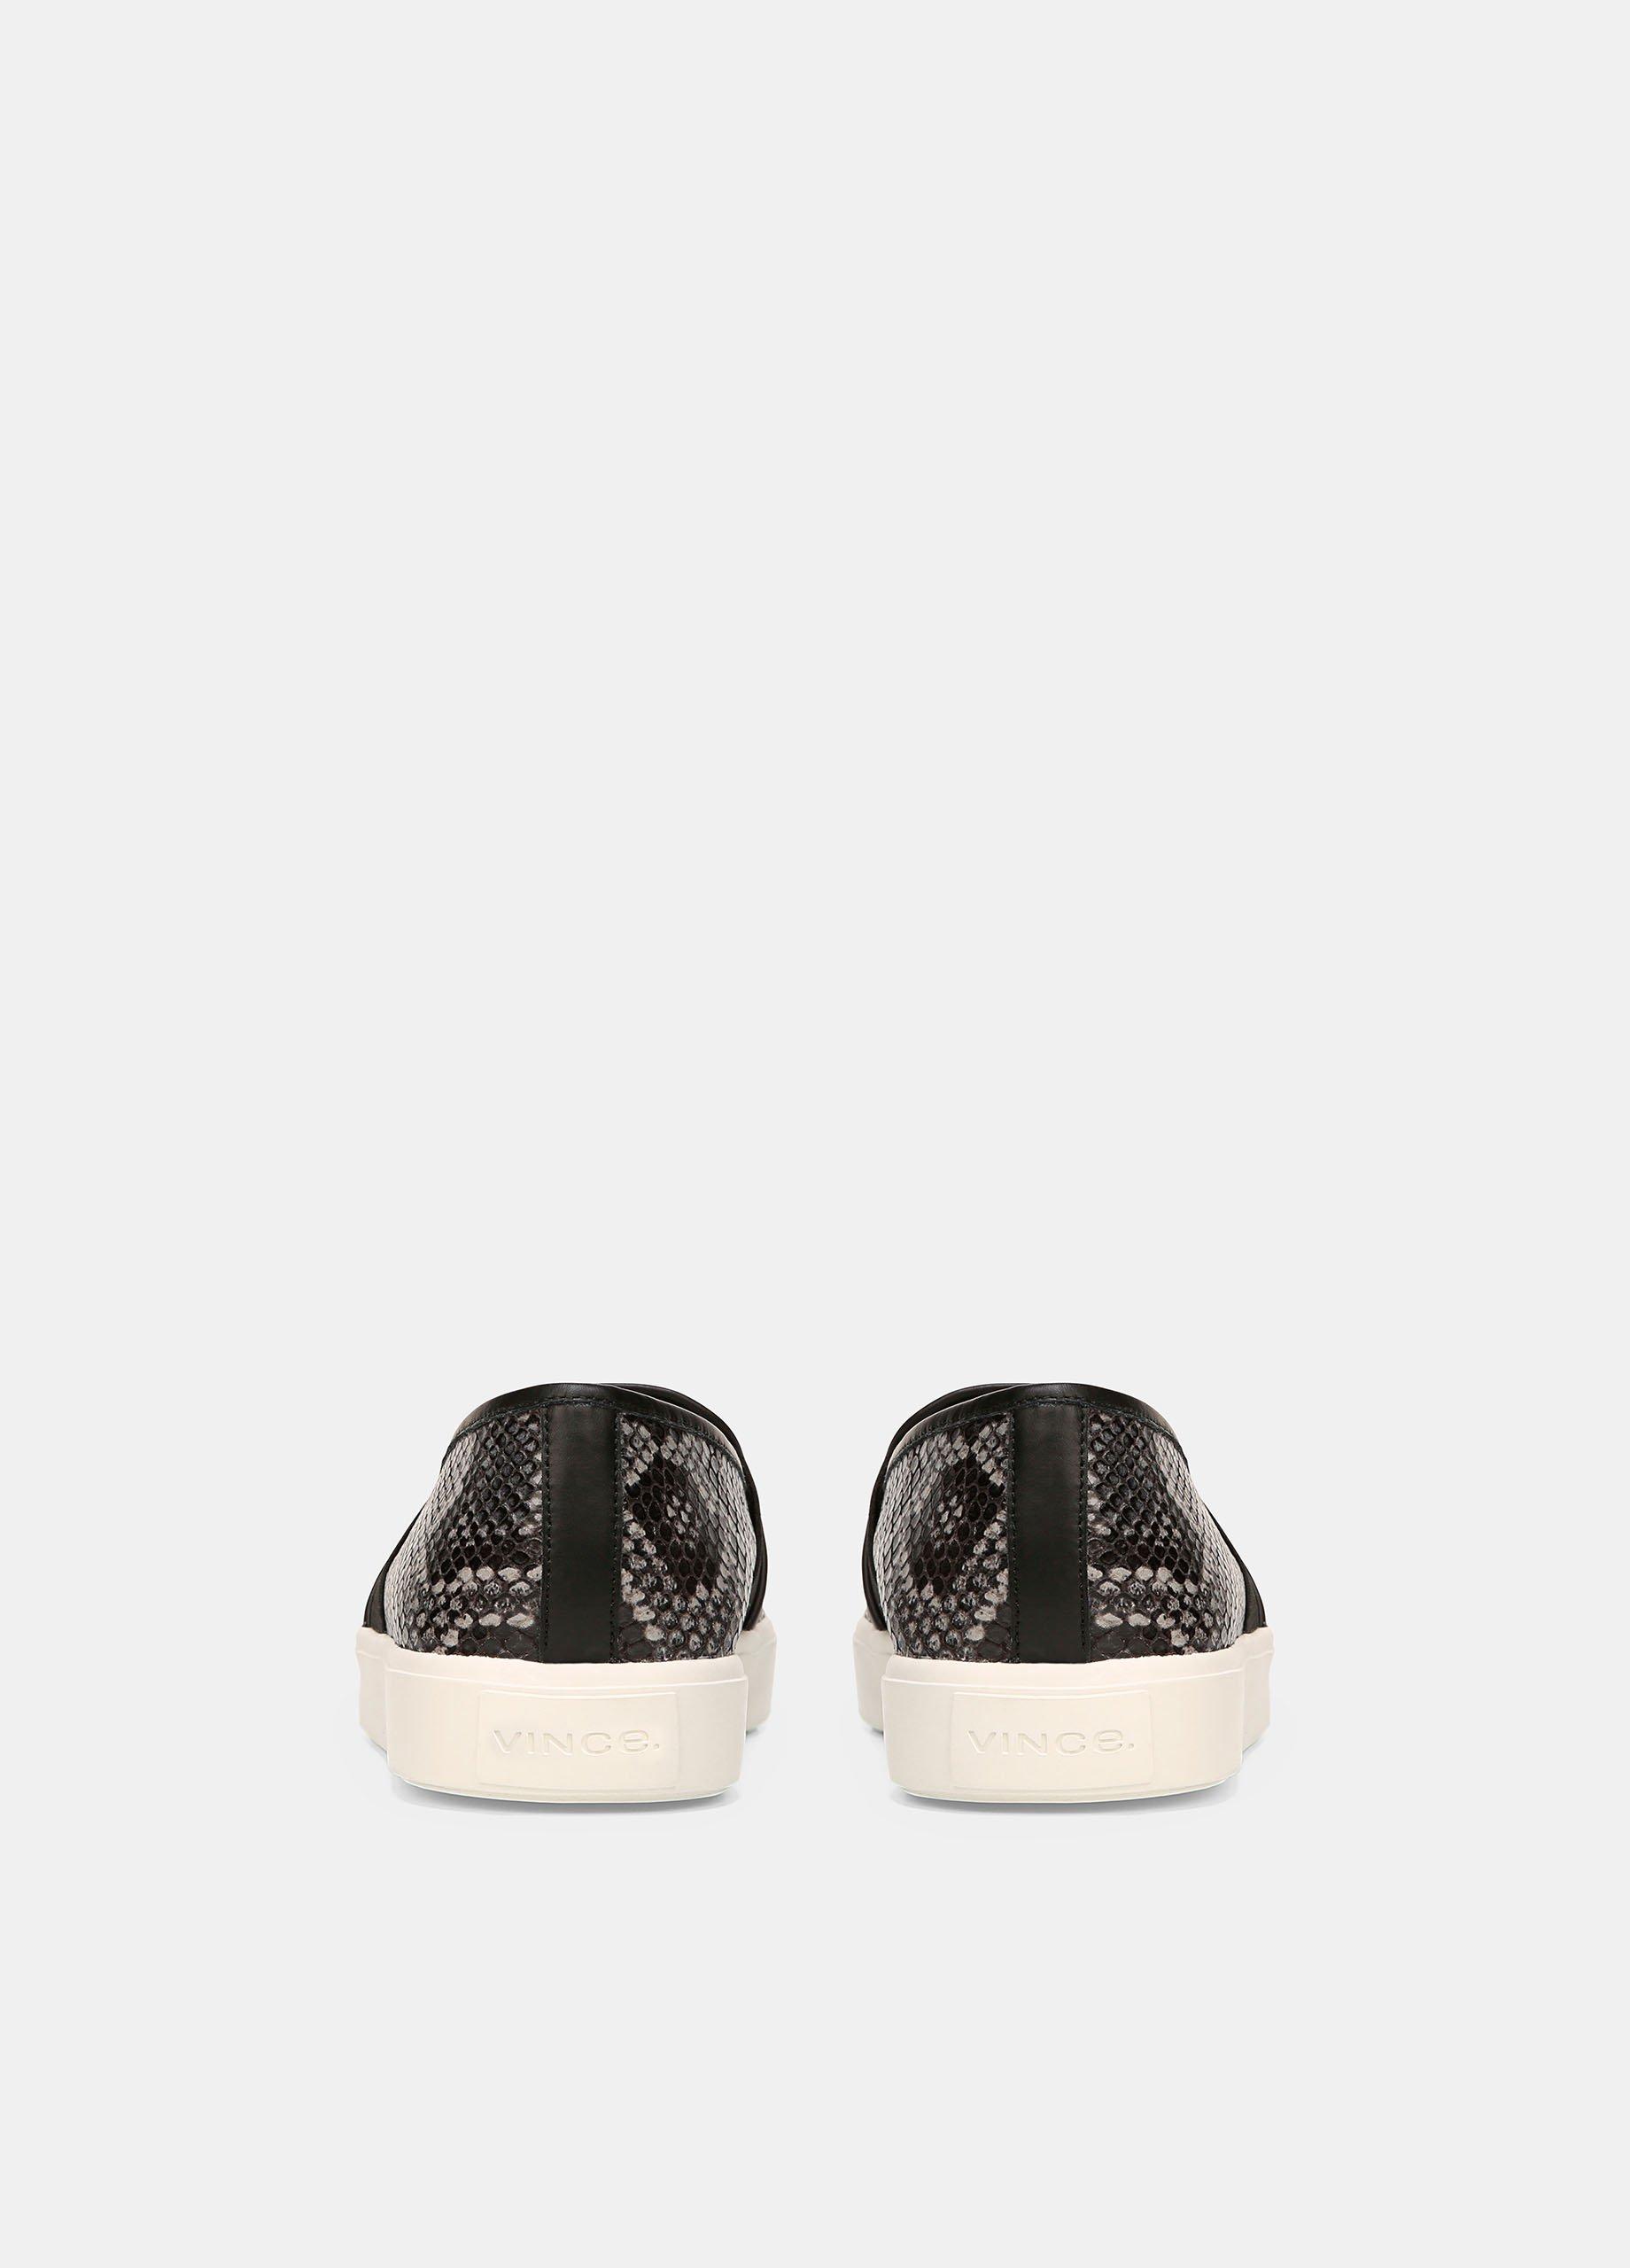 Snake-Effect Leather Blair-5 Sneakers for Women | Vince